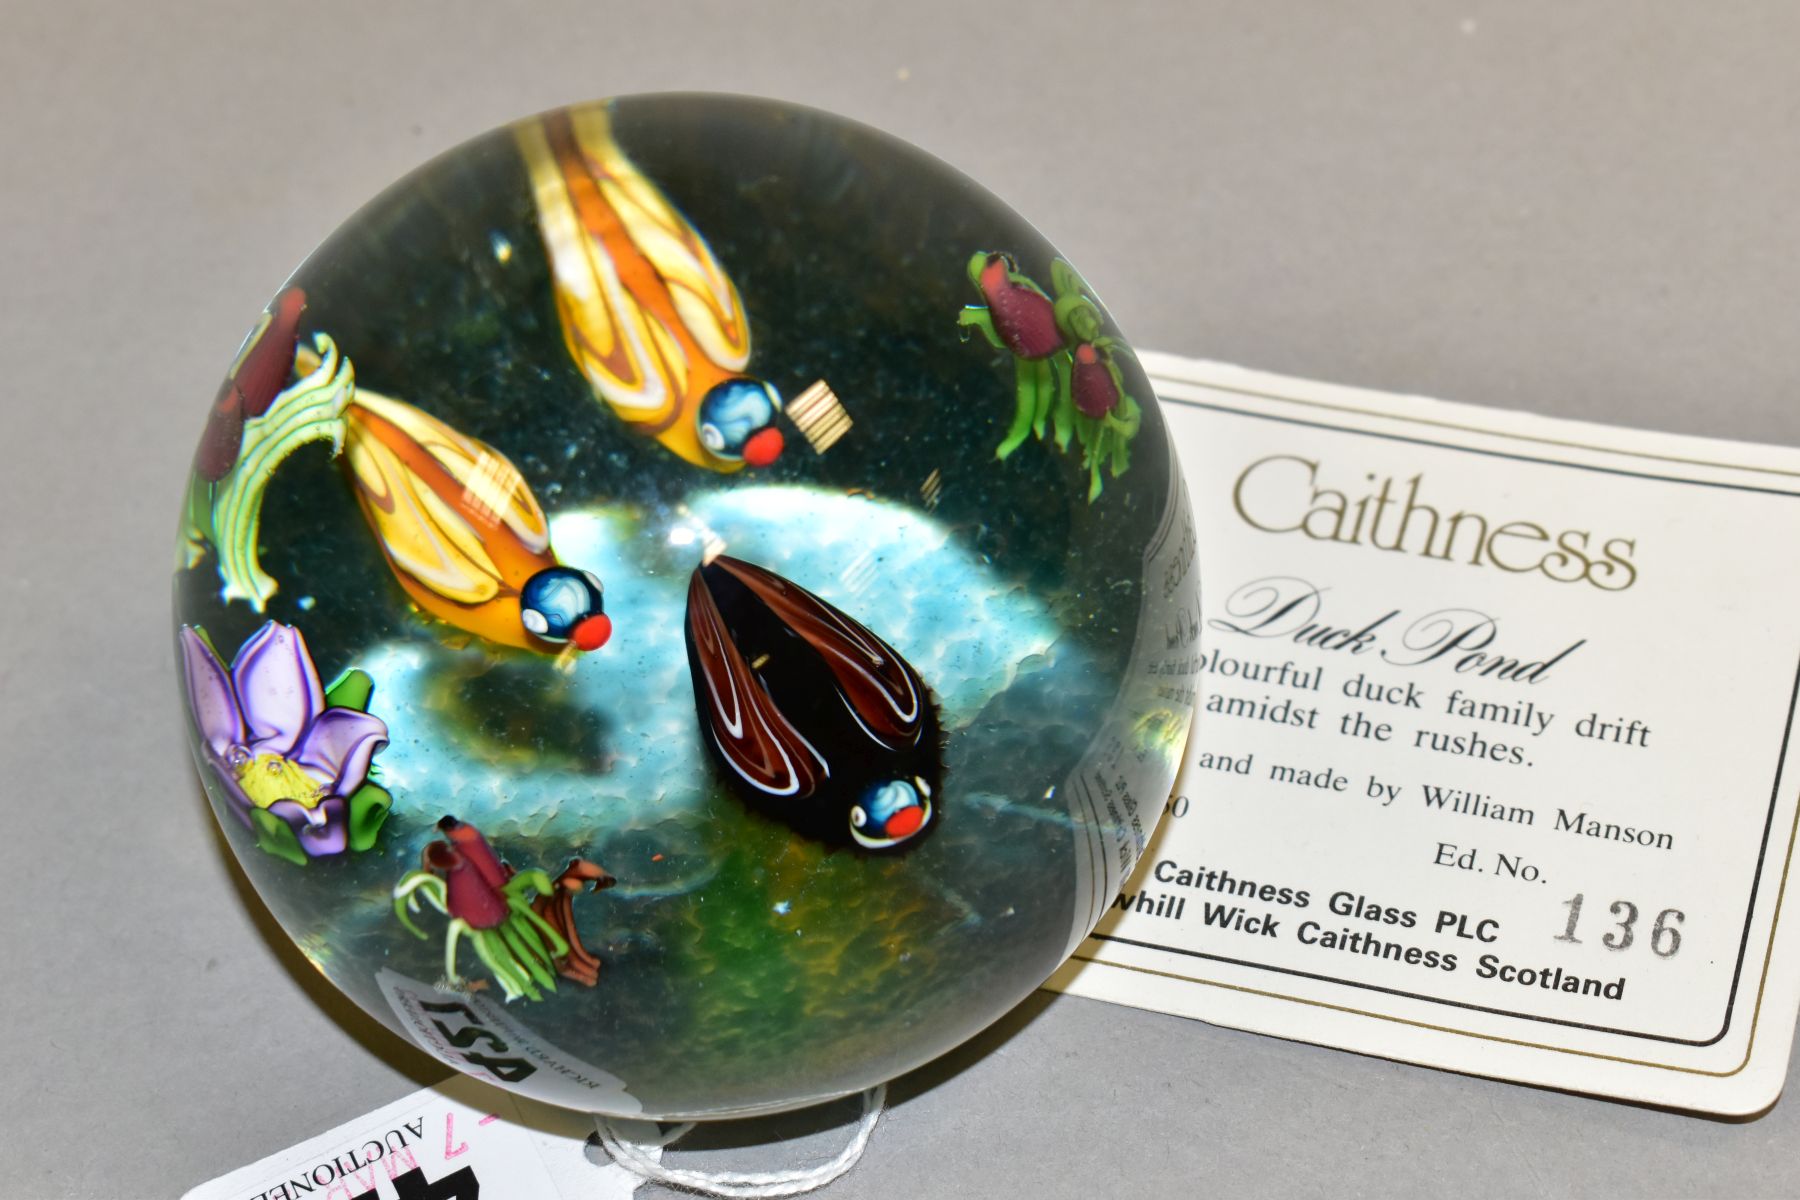 A LIMITED EDITION CAITHNESS GLASS DUCK POND PAPERWEIGHT, with certificate, featuring a colourful - Image 4 of 5